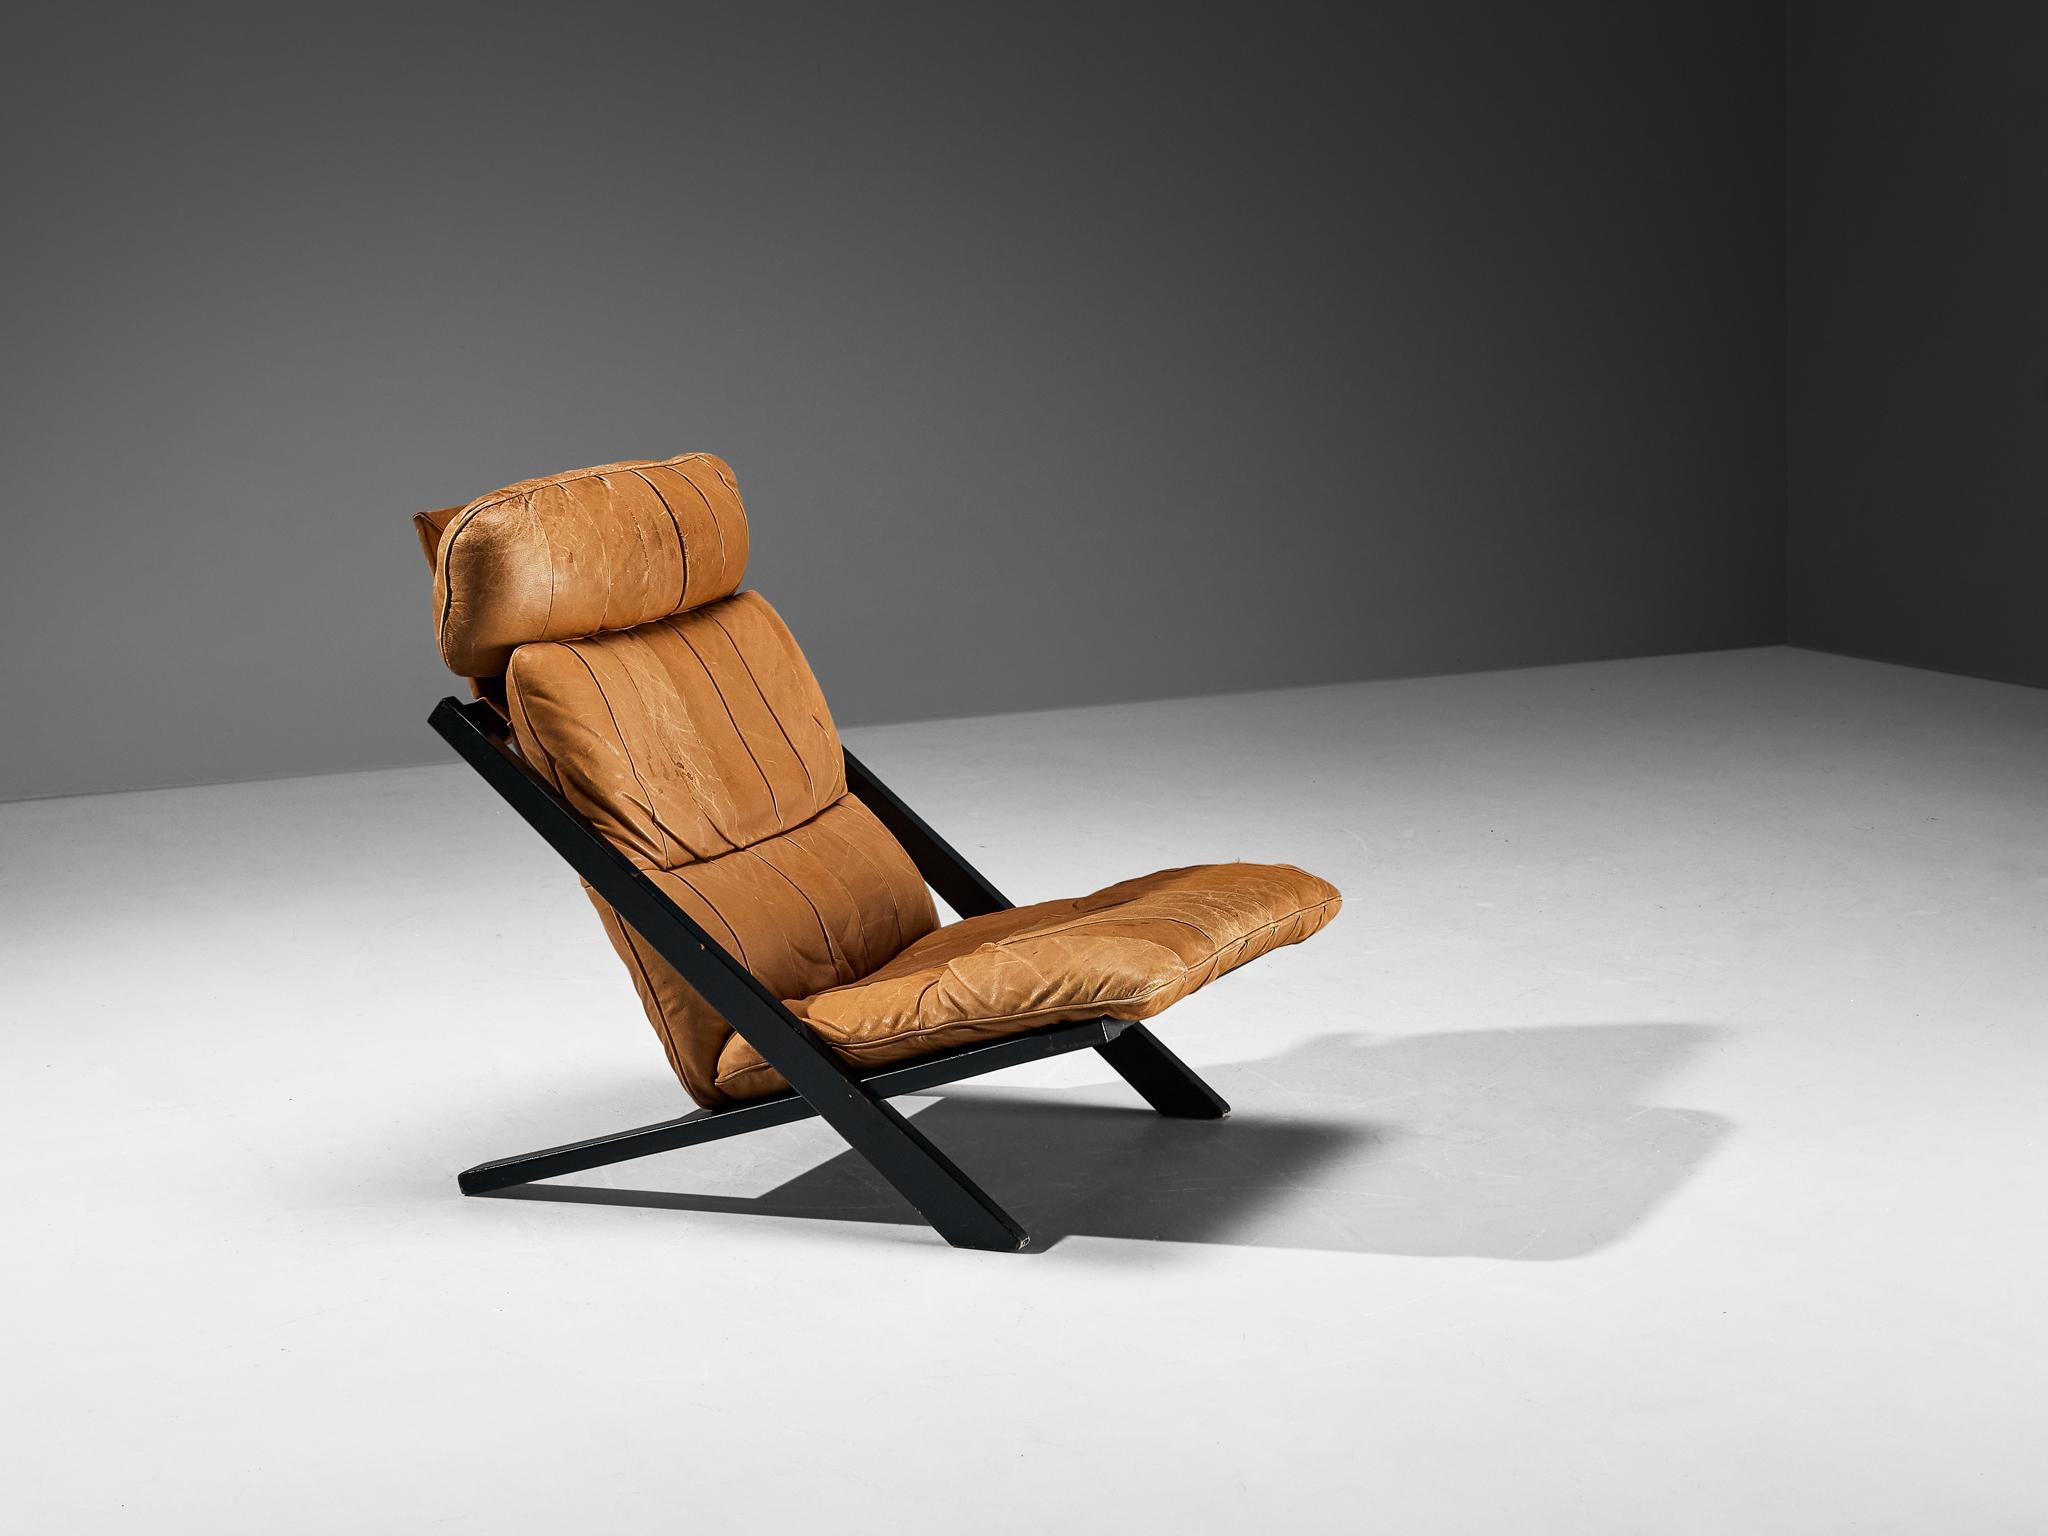 Ueli Berger for De Sede, lounge chair, wood, leather, Switzerland, 1970s

High back lounge chair by Swiss manufacturer De Sede. The X-shaped frame consists of black lacquered wood. This makes an interesting contrast to the warm patinated cognac